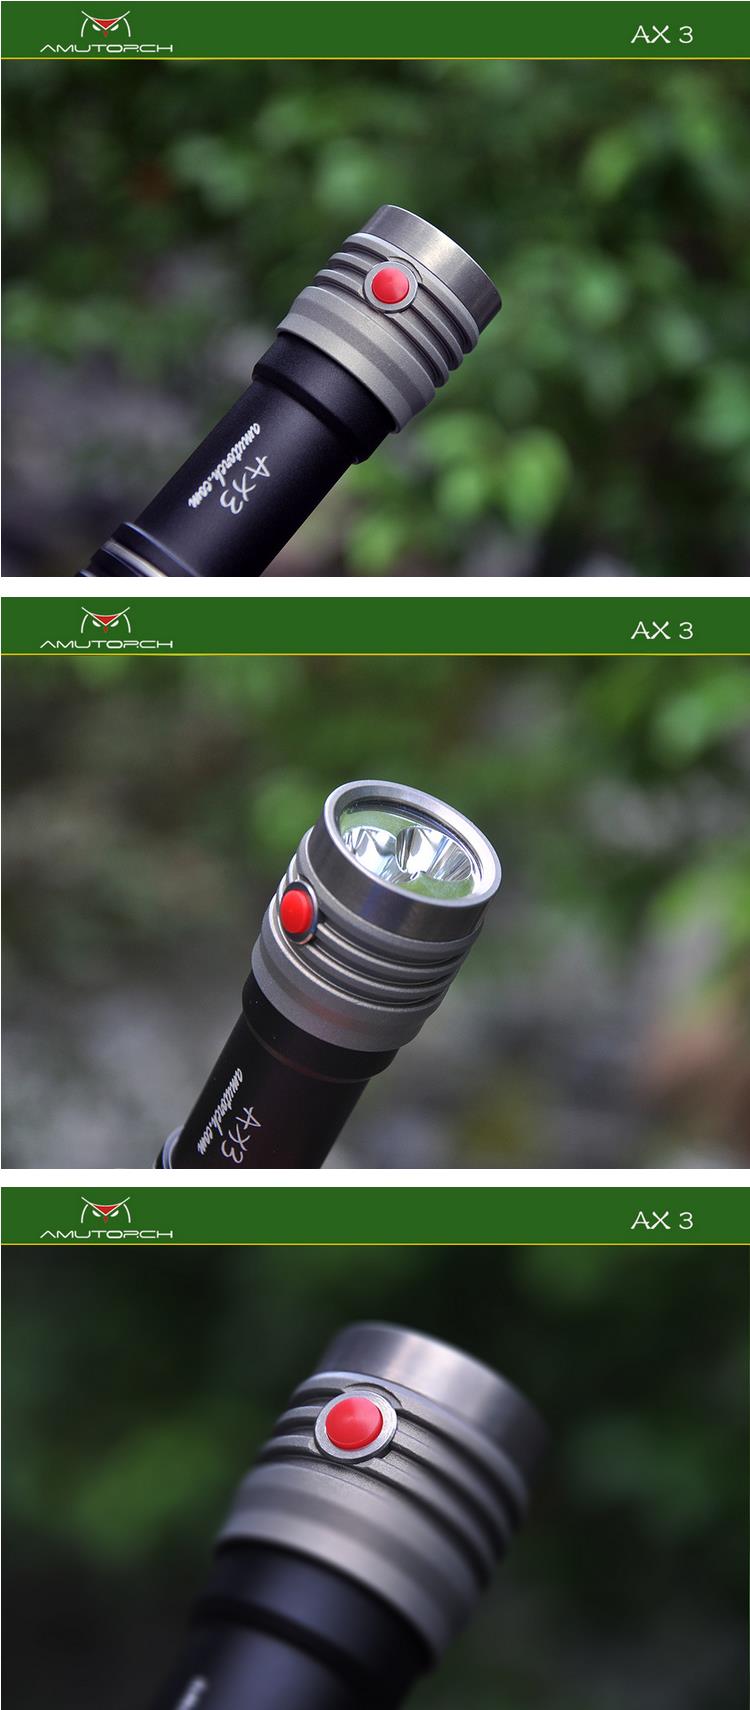 Amutorch-AX3-2x-XP-L-HD-2500LM-Stainless-Steel-EDC-Campact-18650-LED-Flashlight-Outdoor-Mini-Torch-1352270